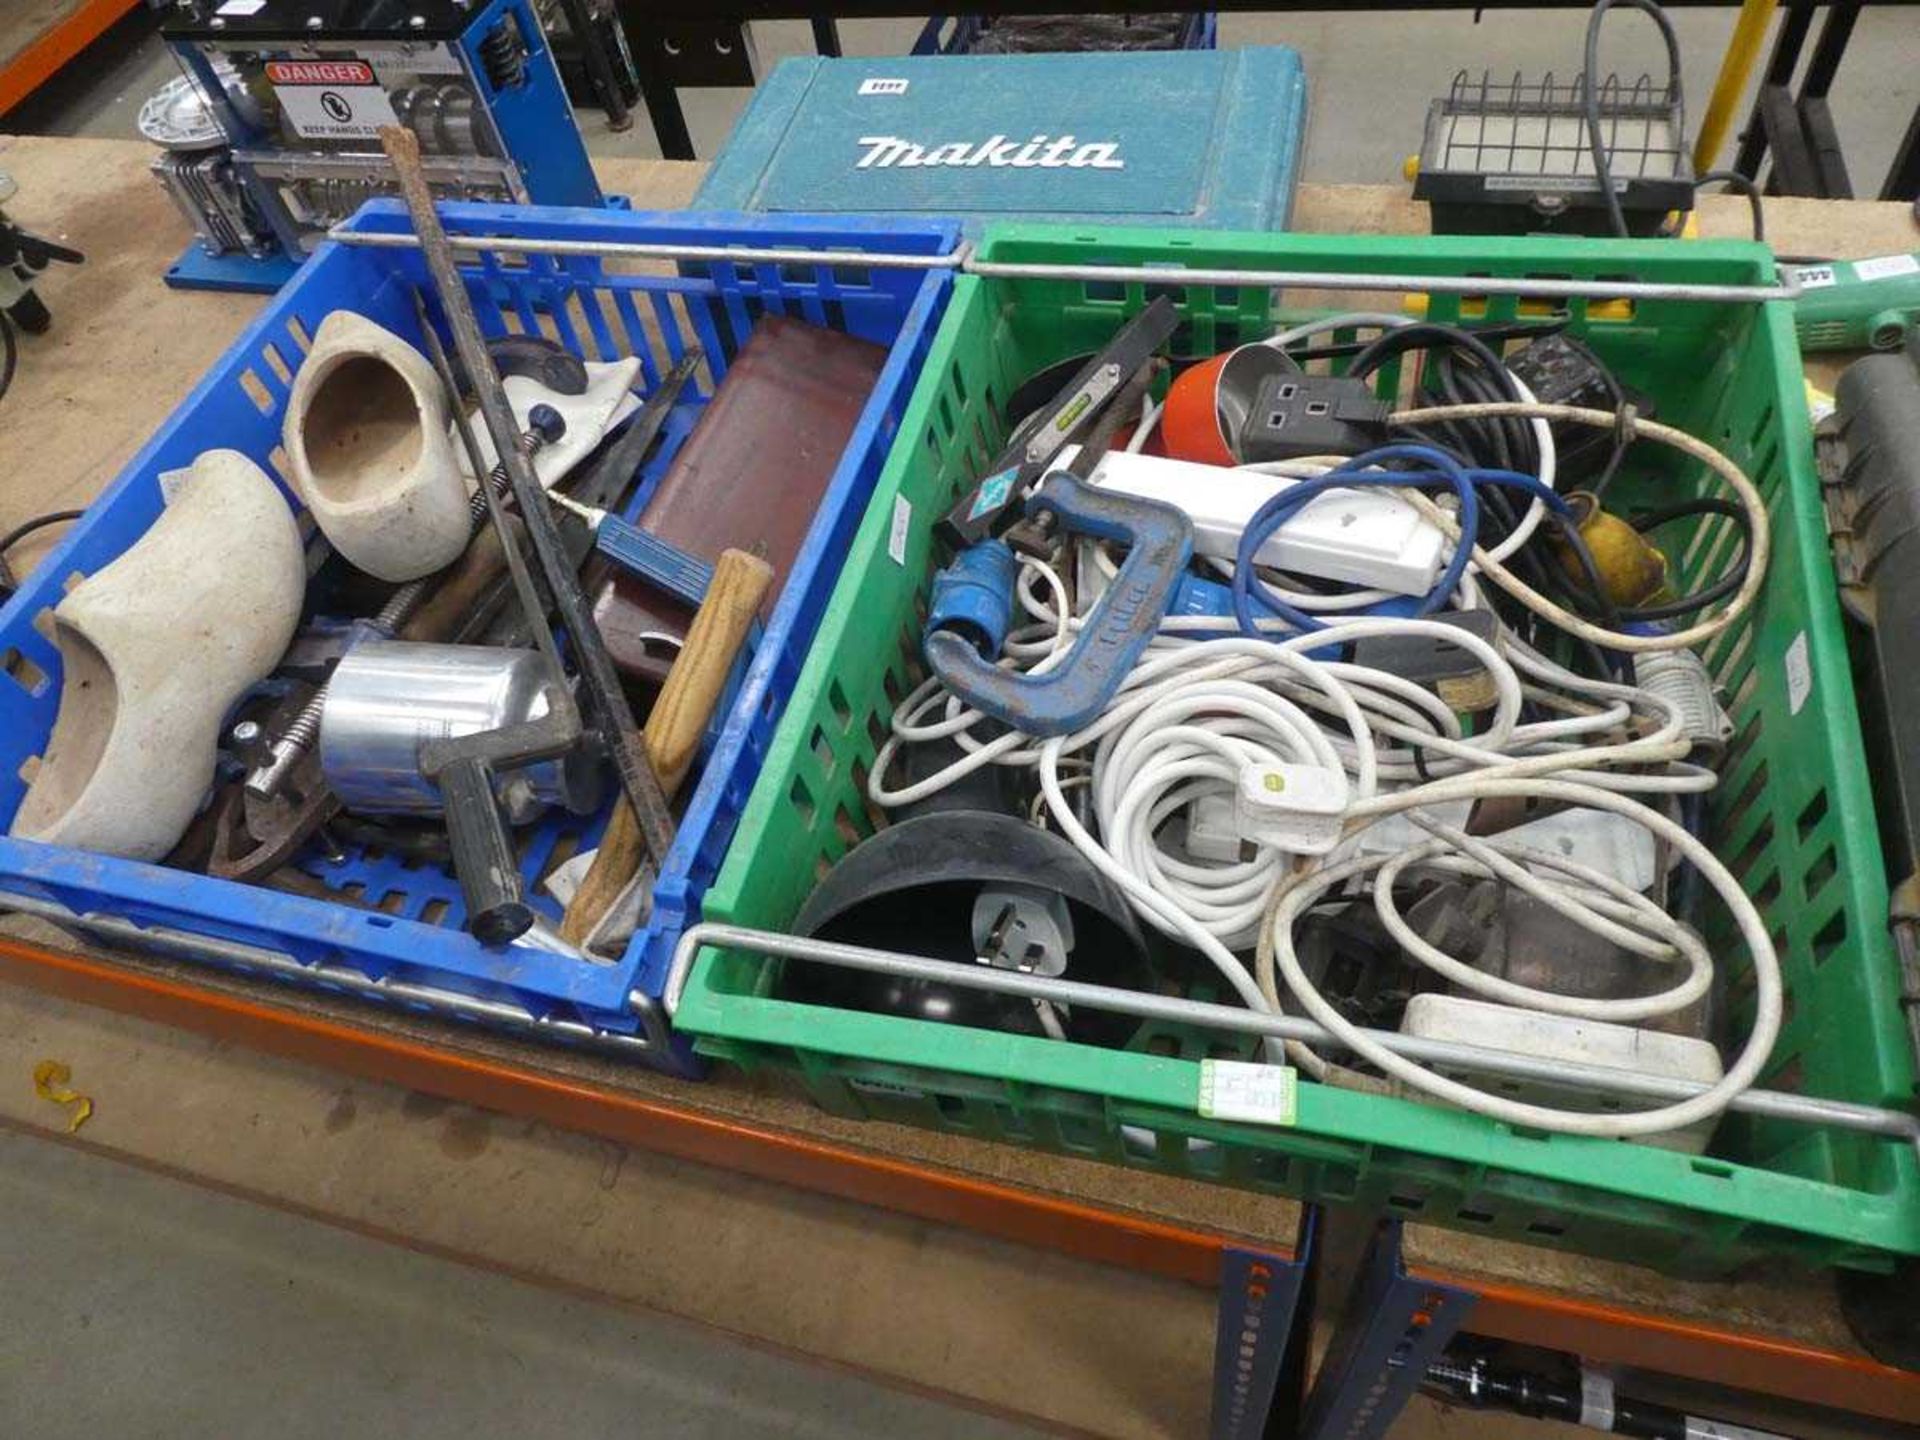 2 crates and toolbox containing clamps, cloggs, tile rippers, extension cables, tools etc